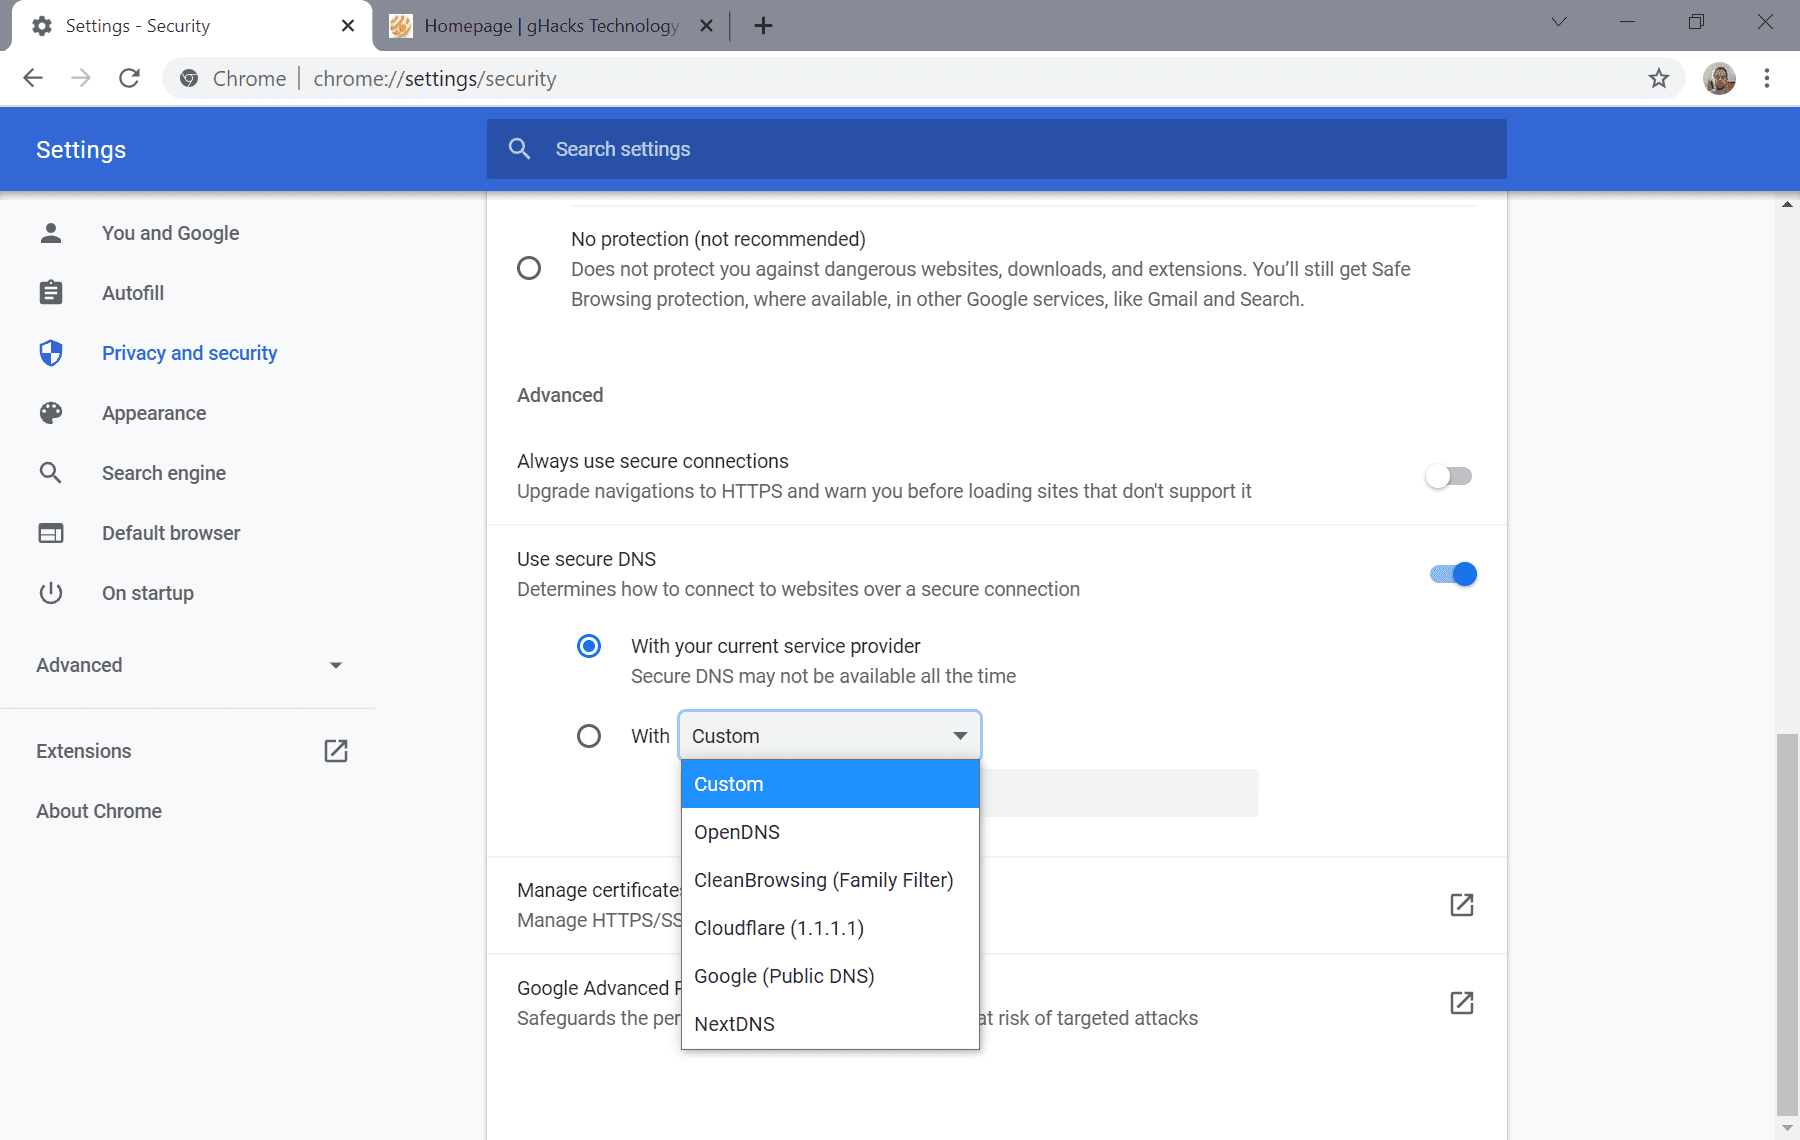 How to enable DNS-over-HTTPS (Secure DNS) in Chrome, Brave, Edge, Firefox and other browsers